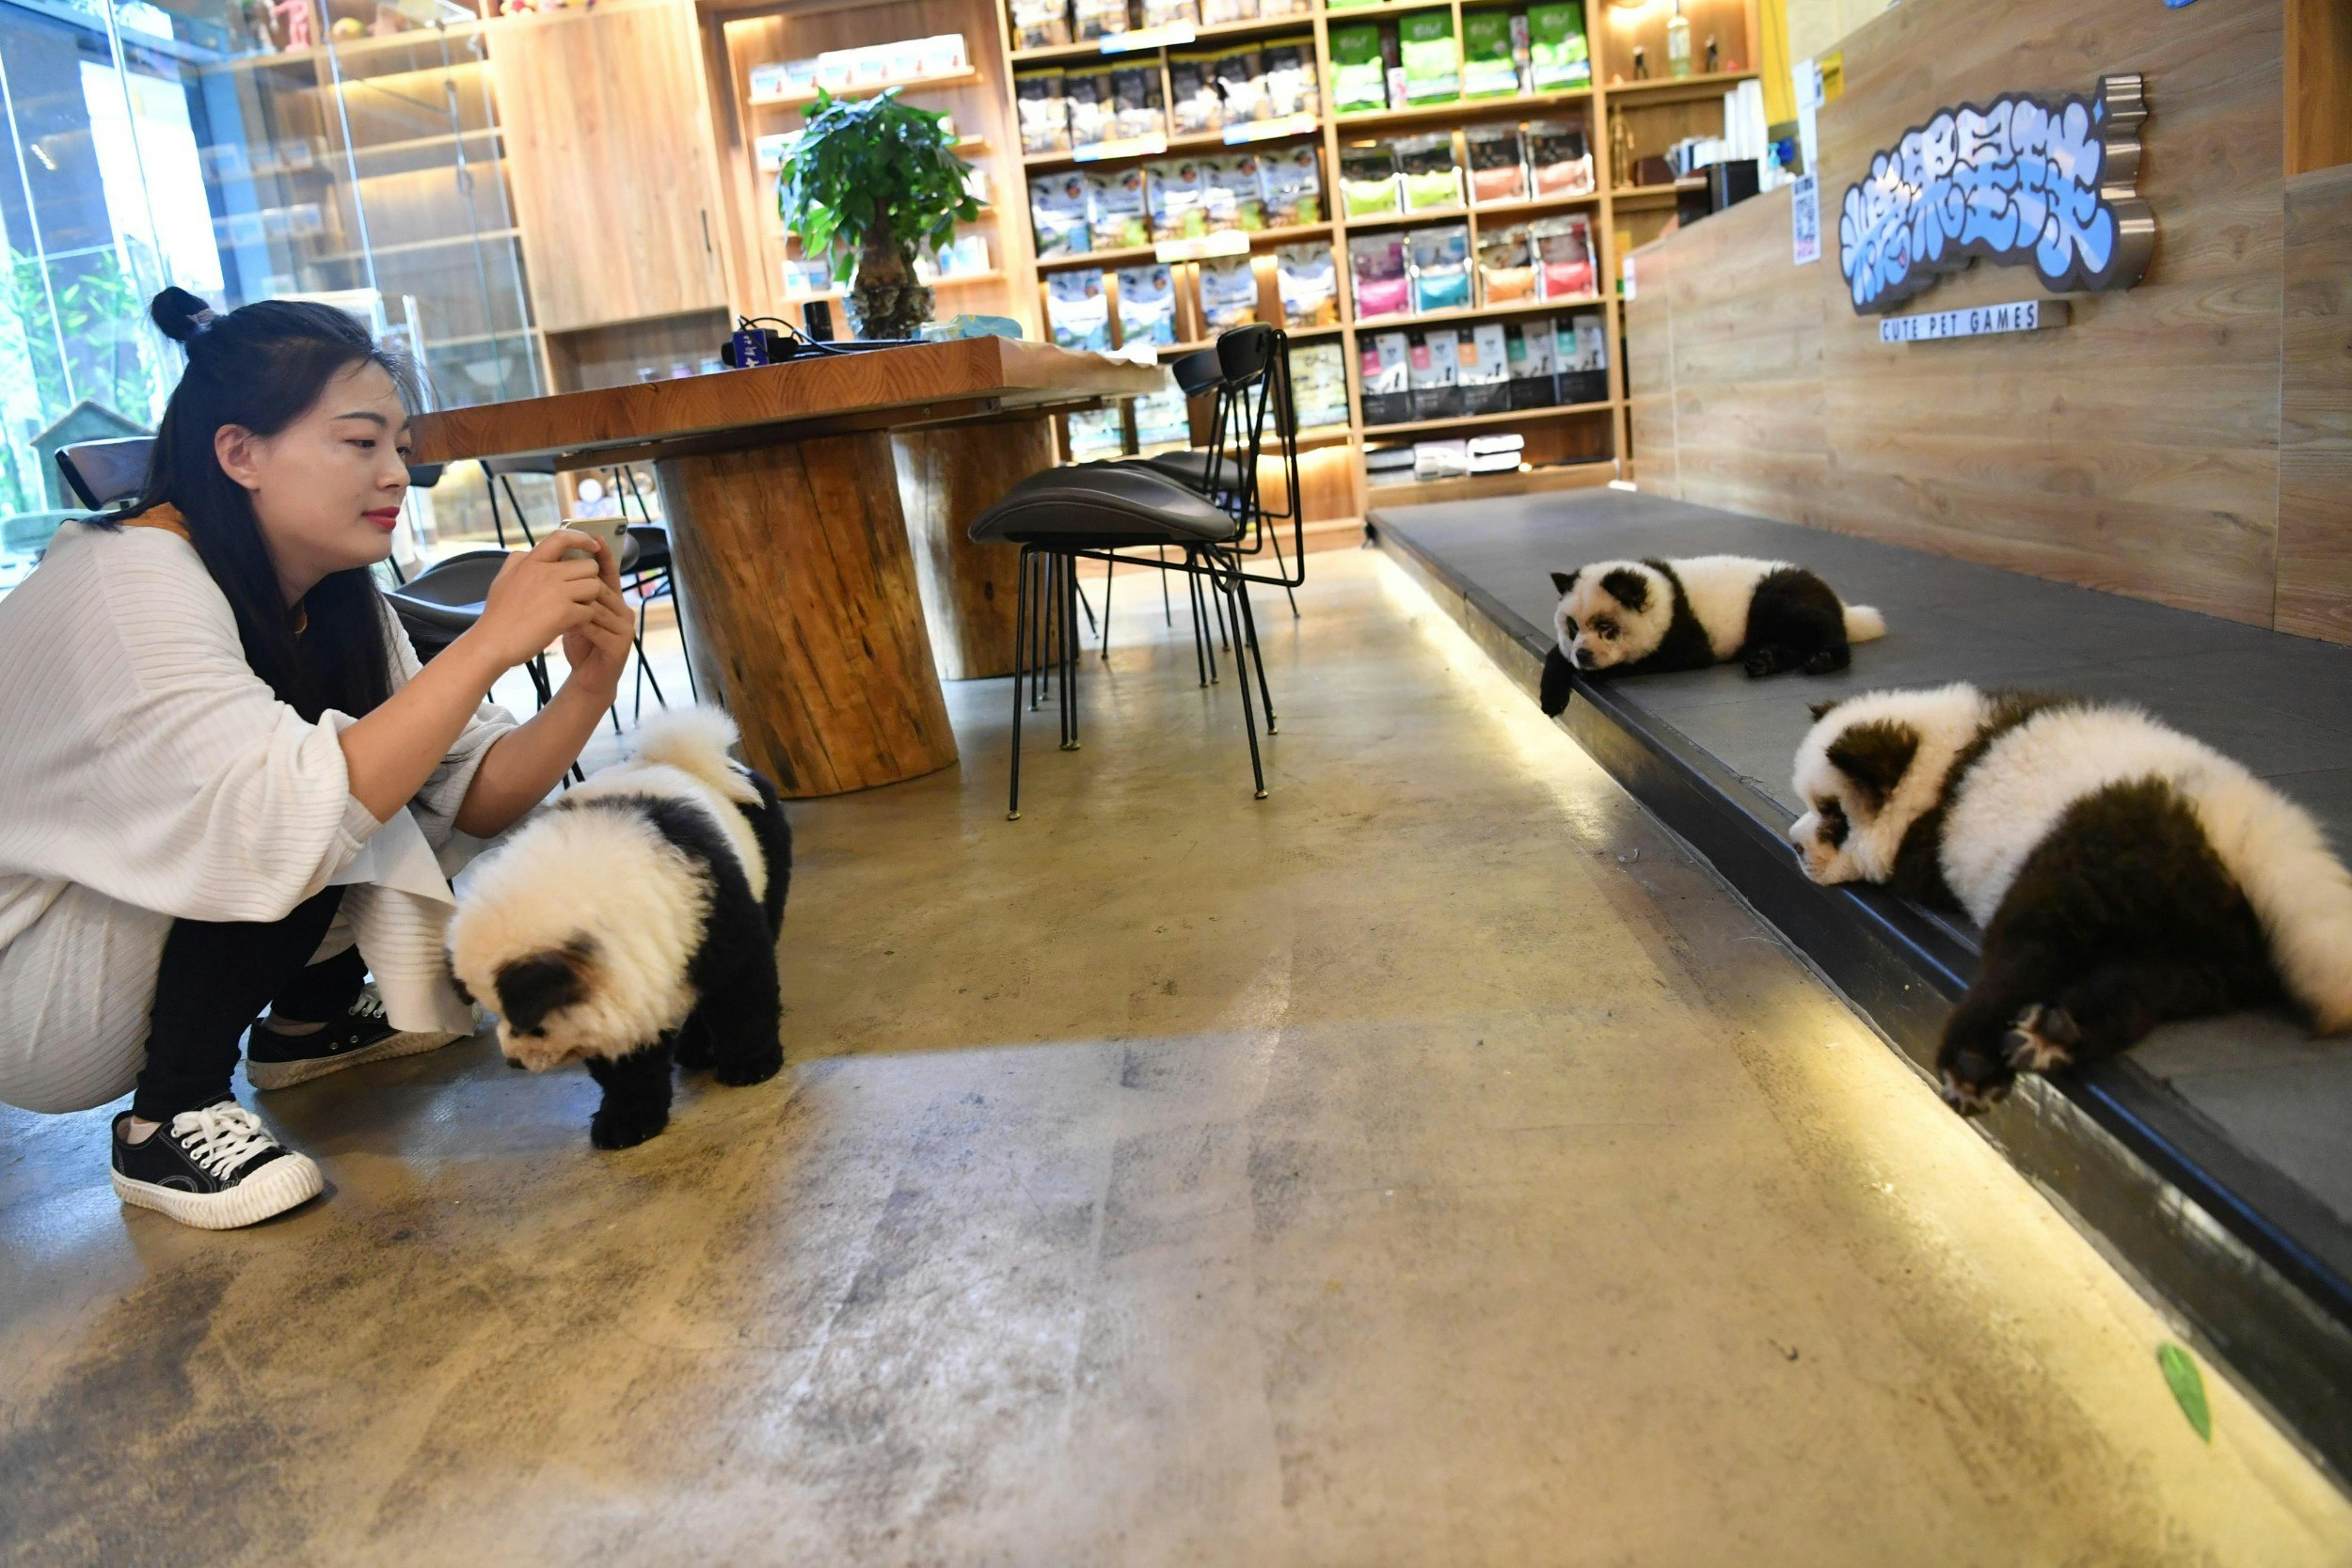 Chow chow dogs painted as giant panda are seen at a pet cafe